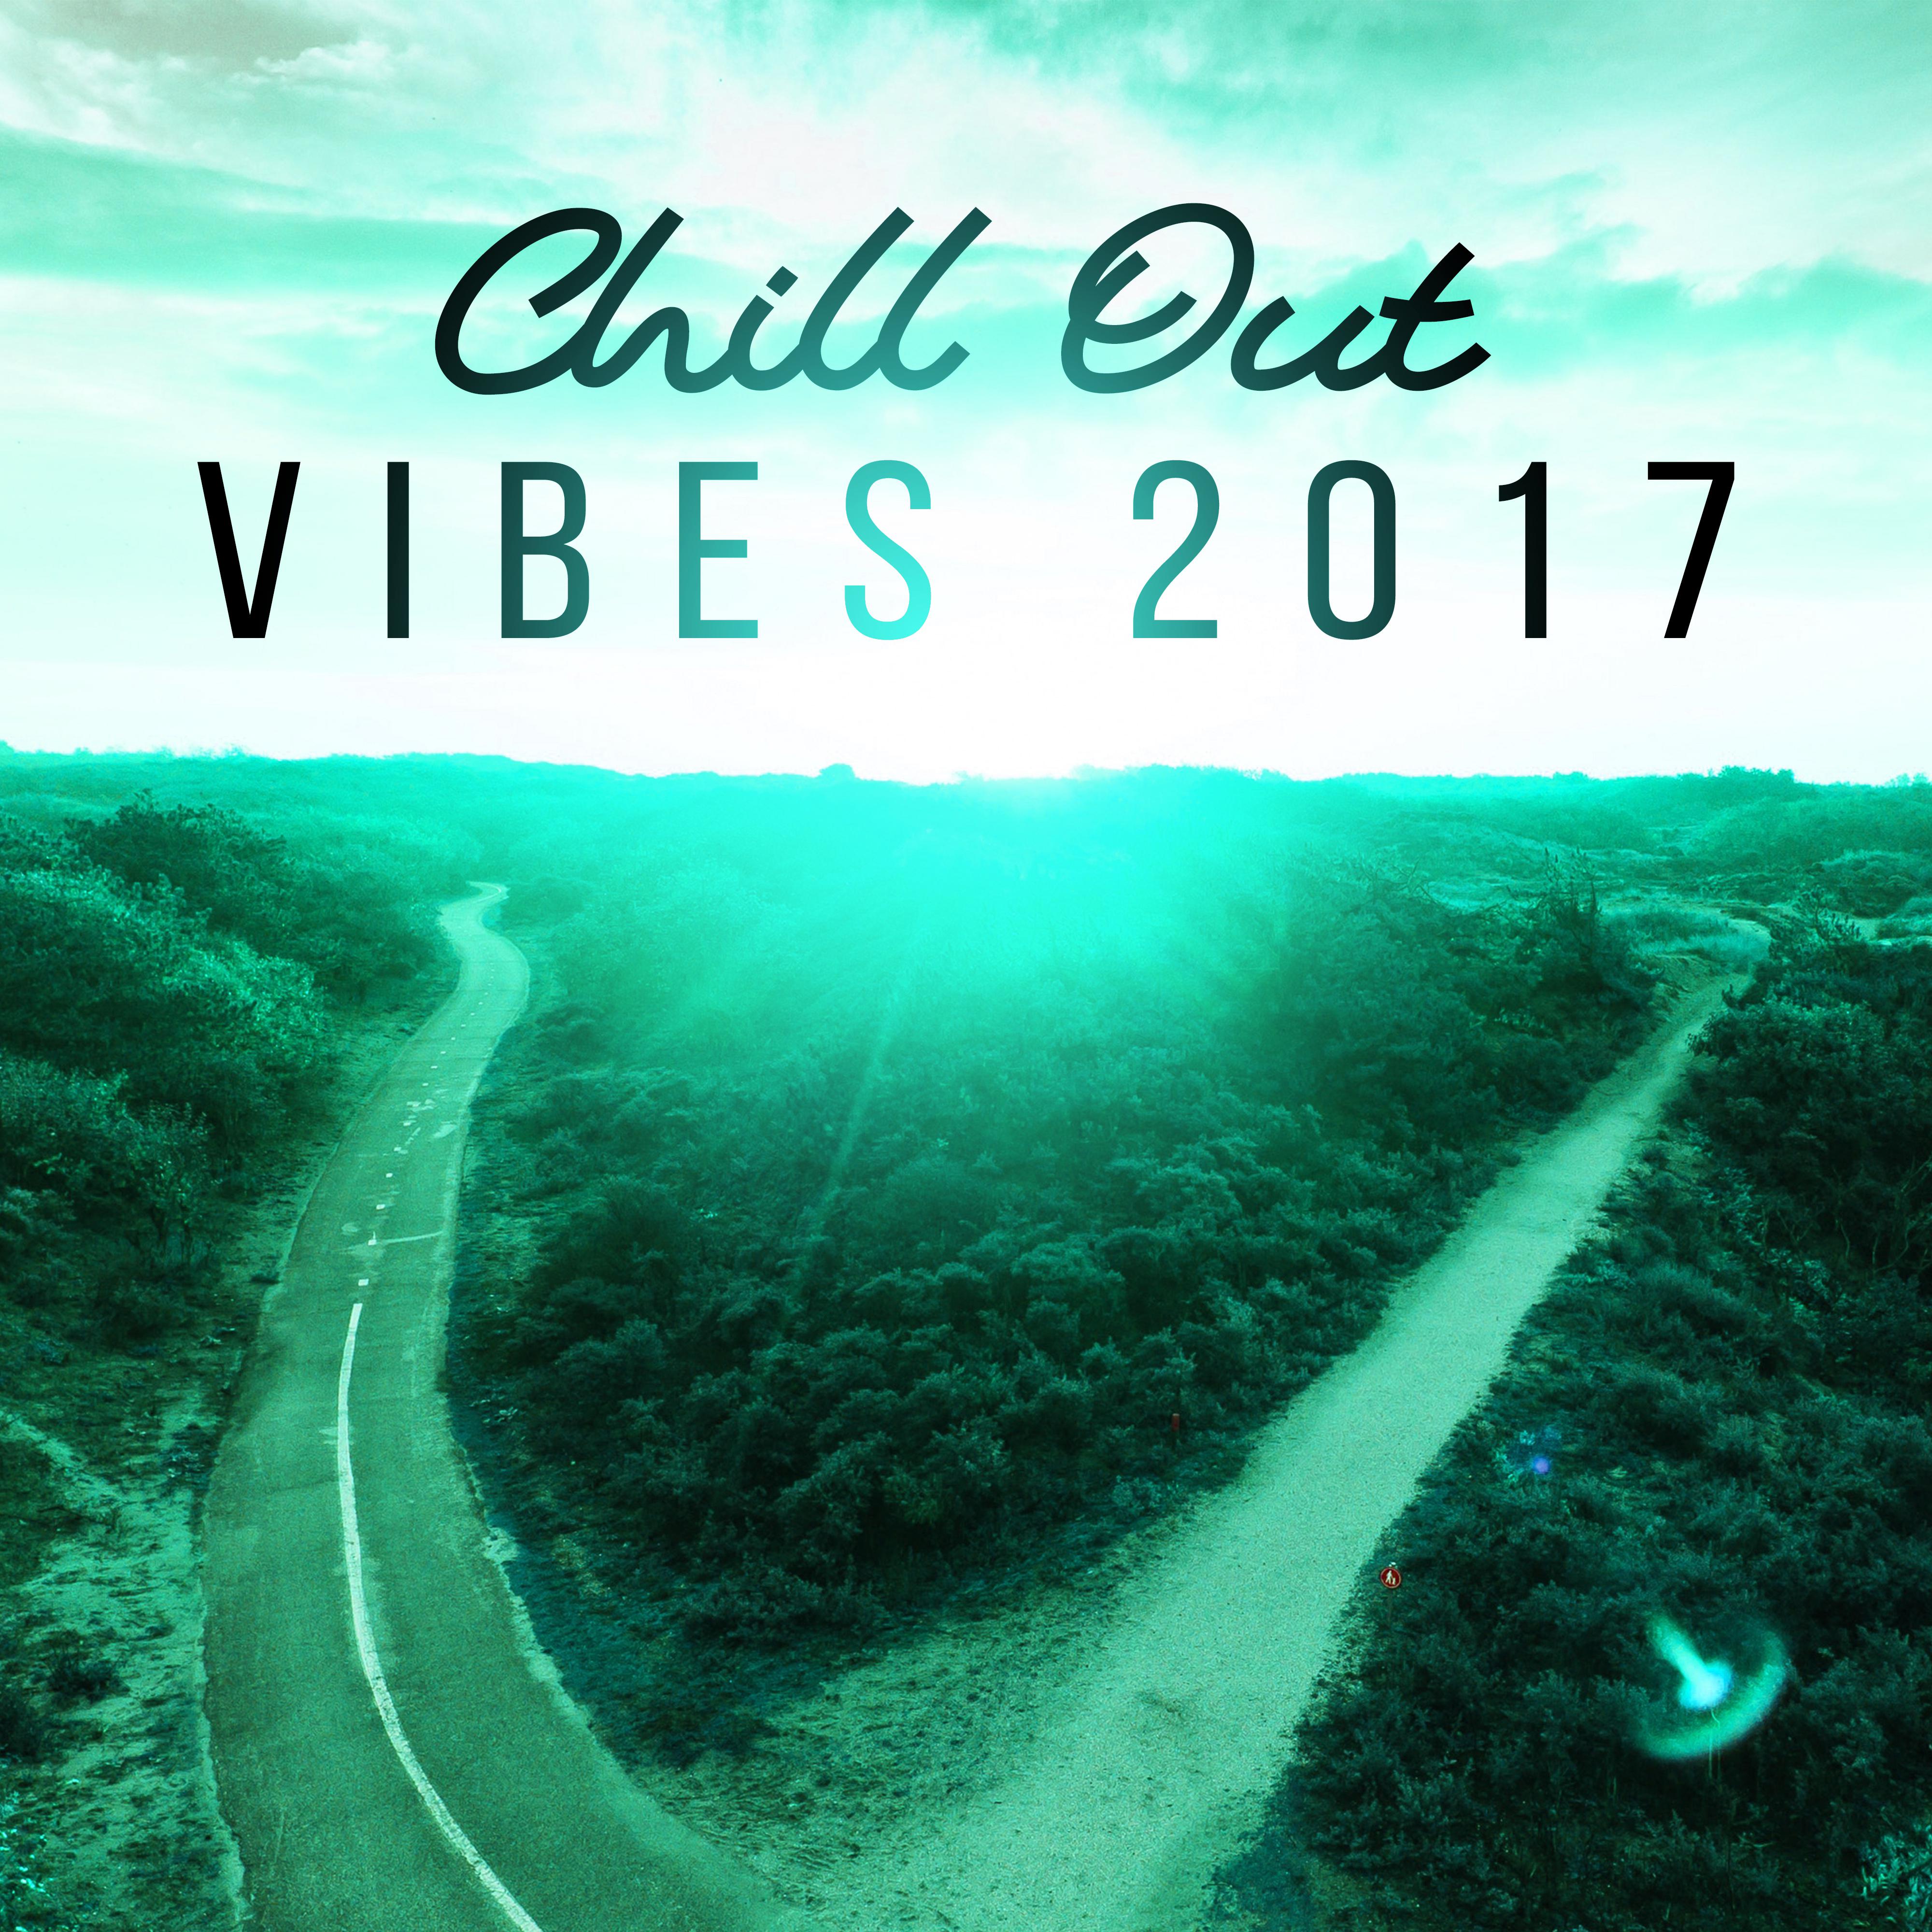 Chill Out Vibes 2017  Ibiza Calmness, Holiday Beats, Sunbed Chill, Hot Summer